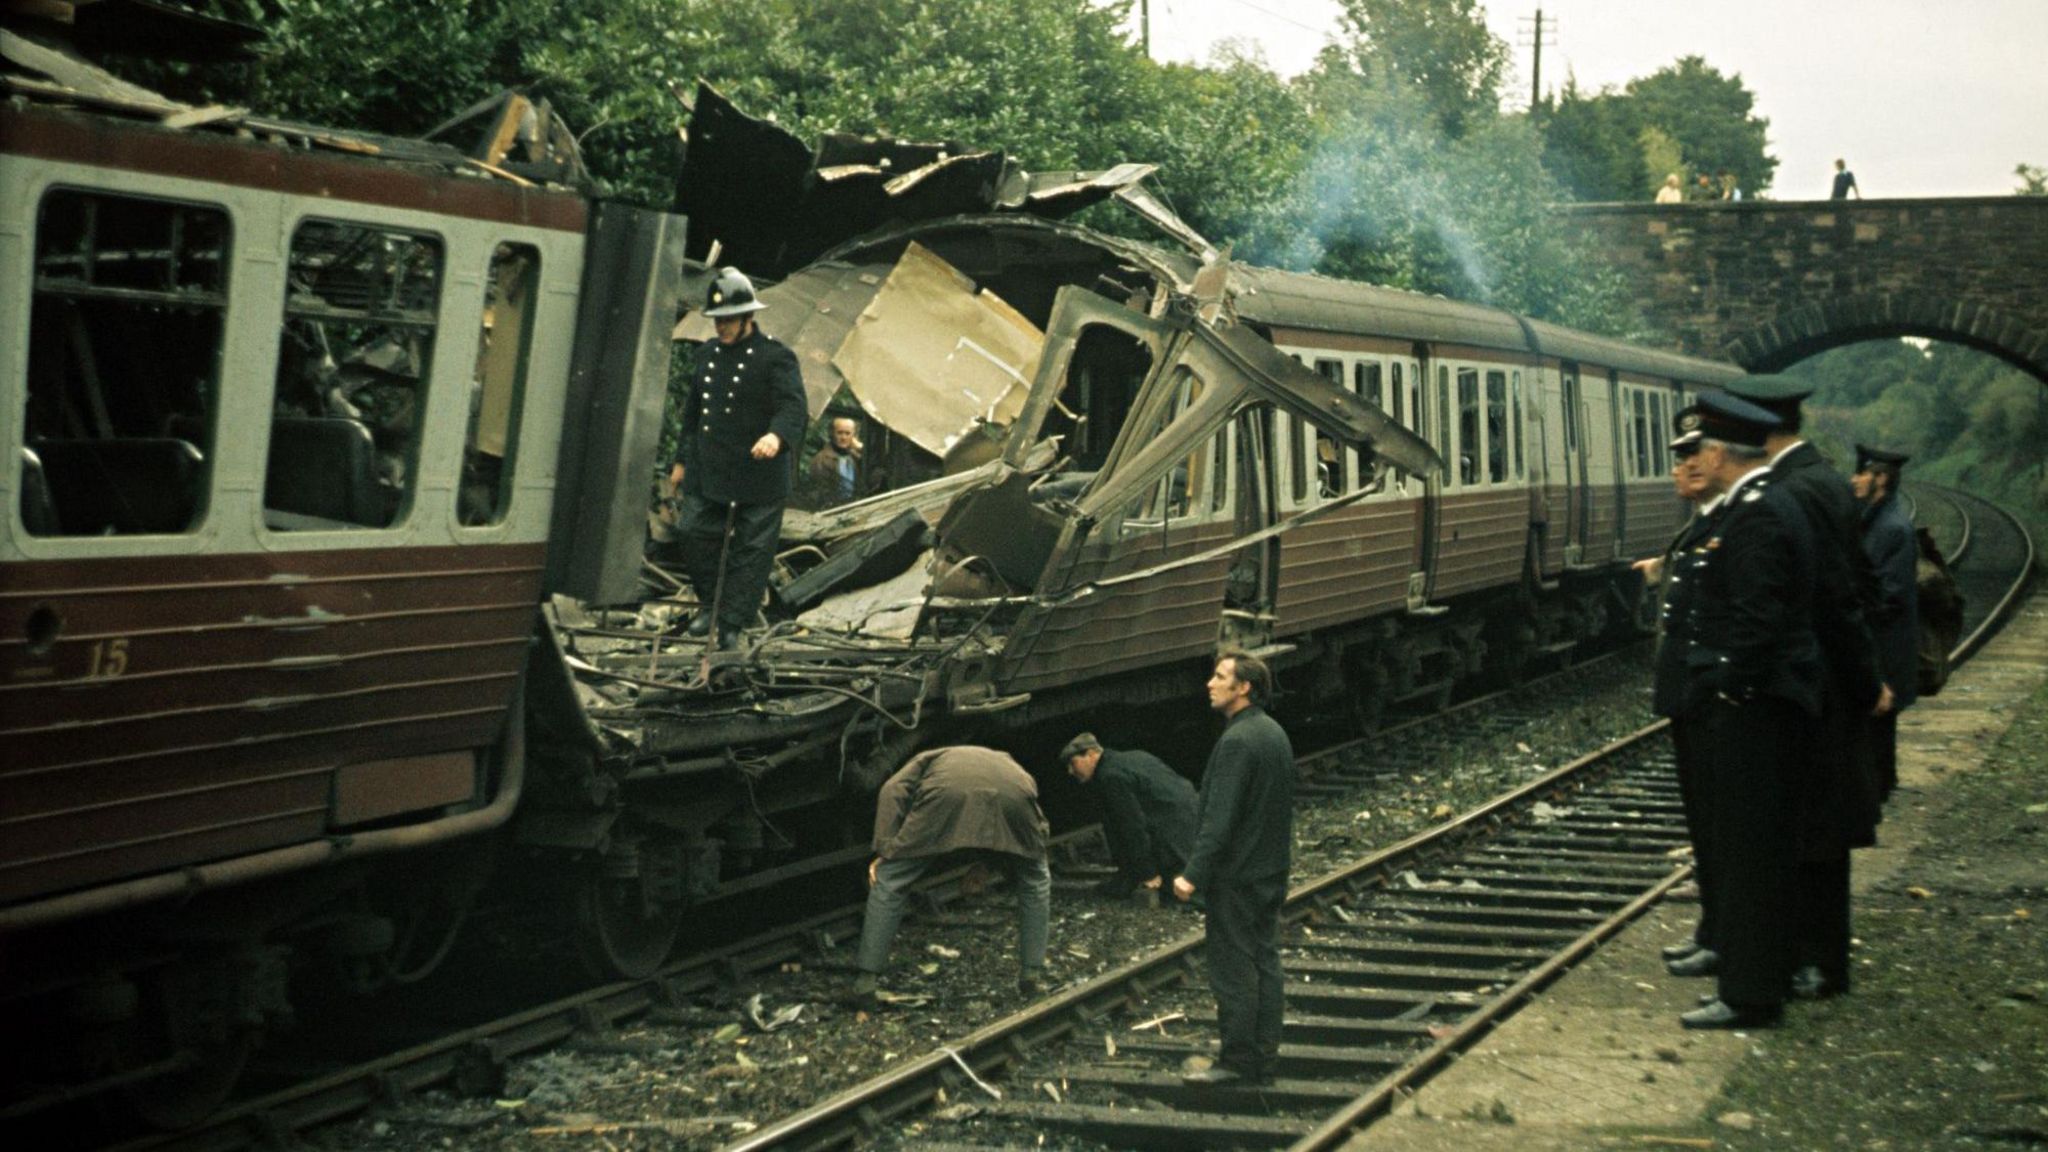 A train badly damaged by a bomb in Marino, County Down, Northern Ireland on 15 October 1973